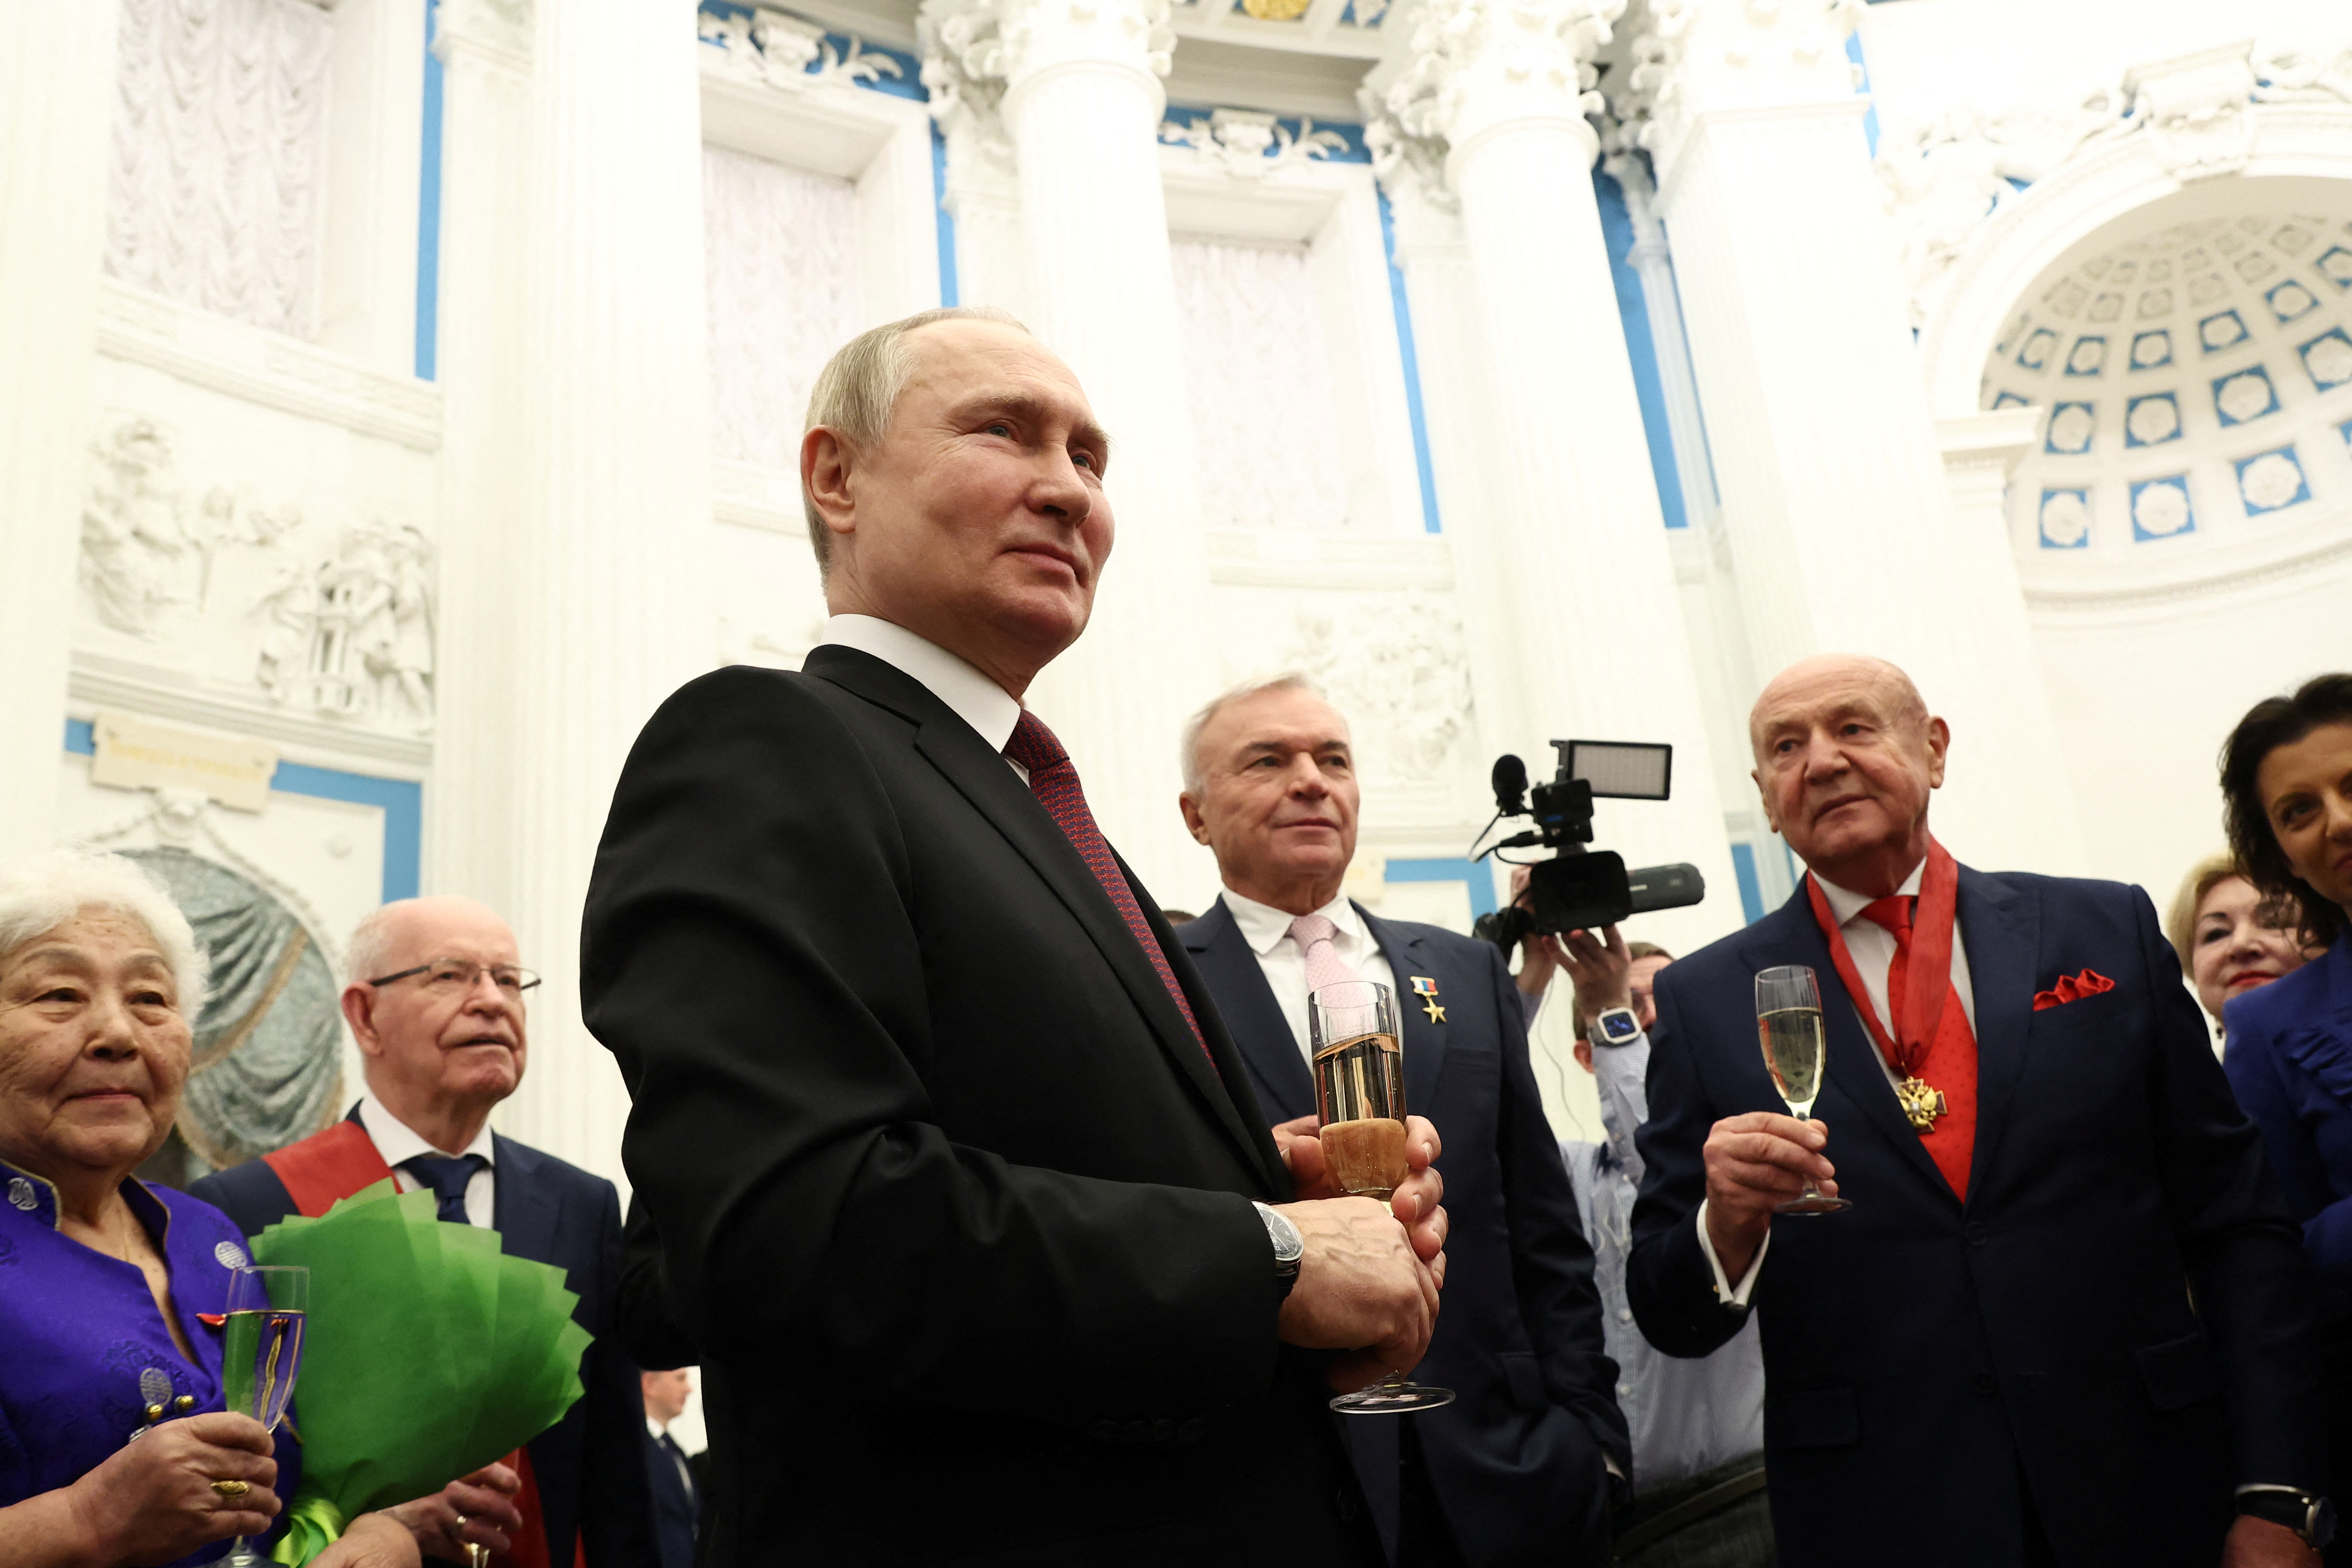 Russia's President Putin presents state awards during a ceremony in Moscow